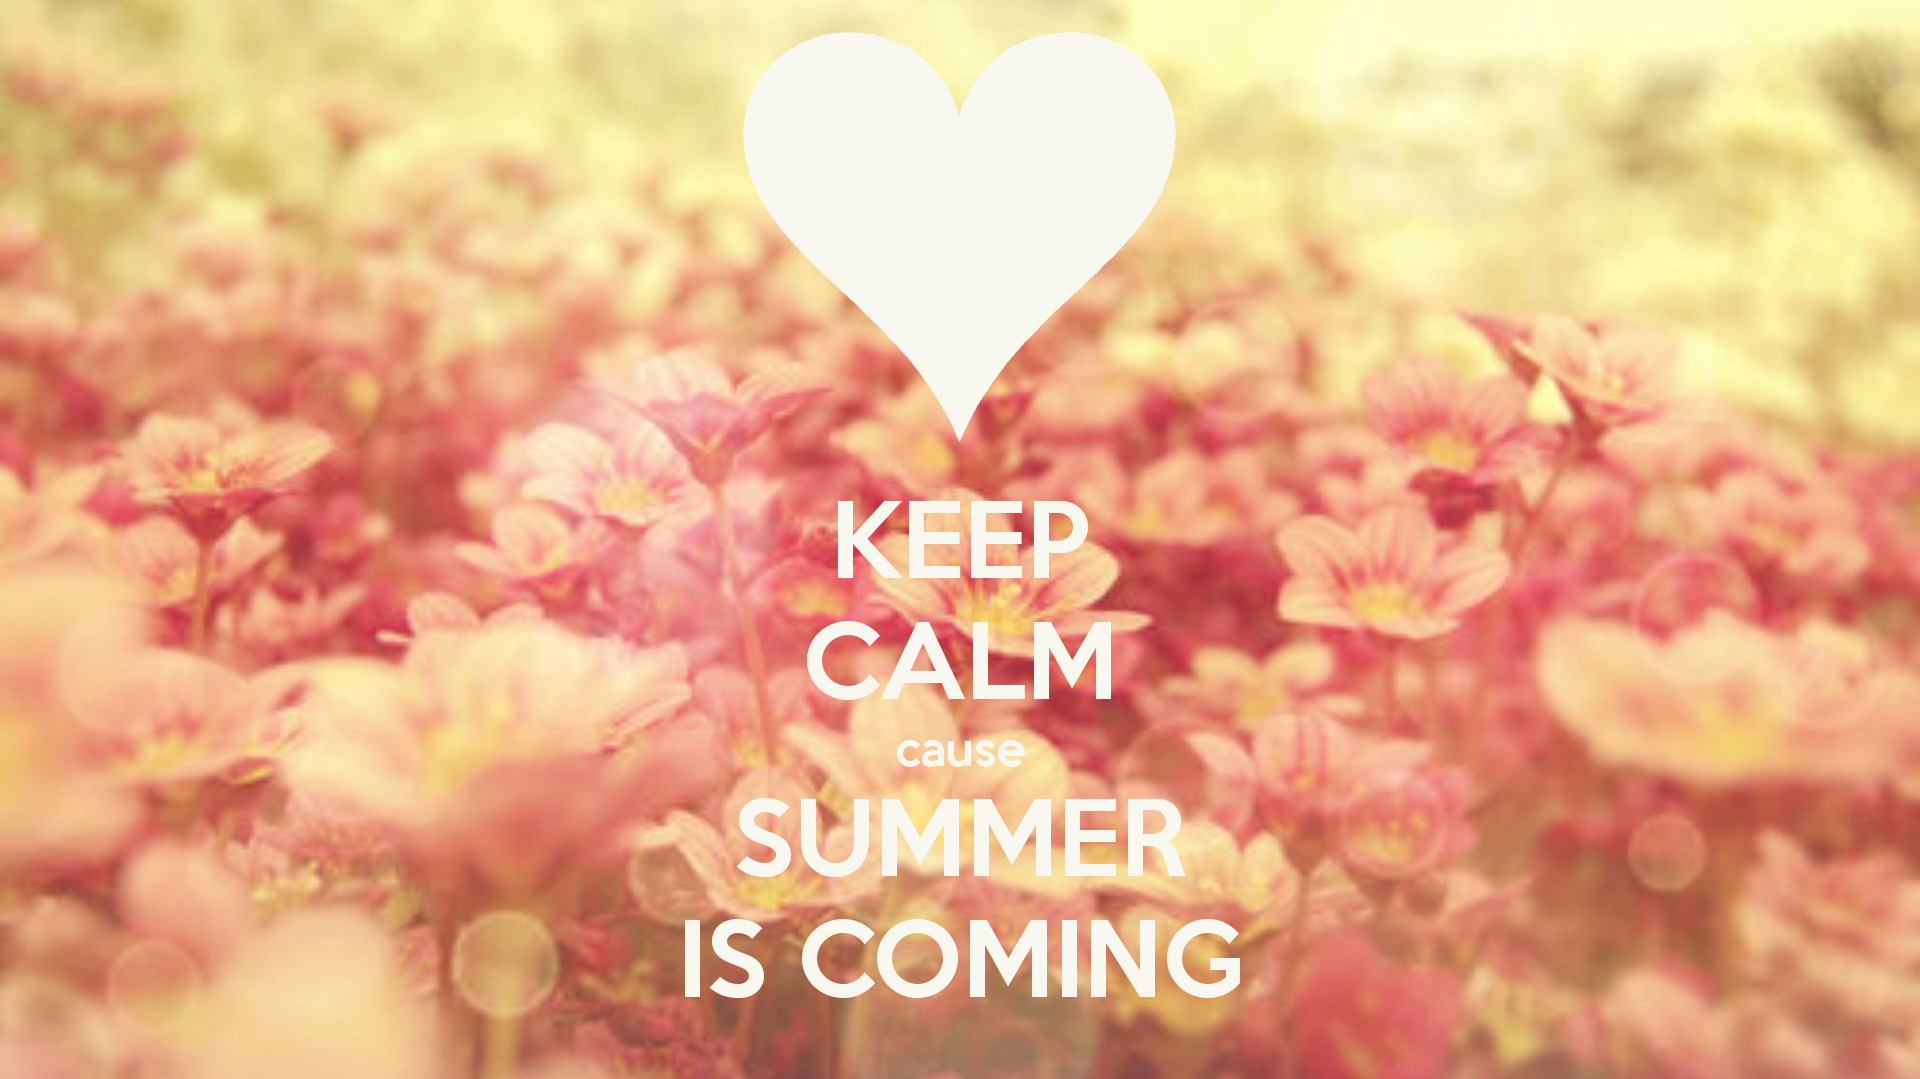 Keep Calm Cause Summer Is Coming Pictures Photos and Images for